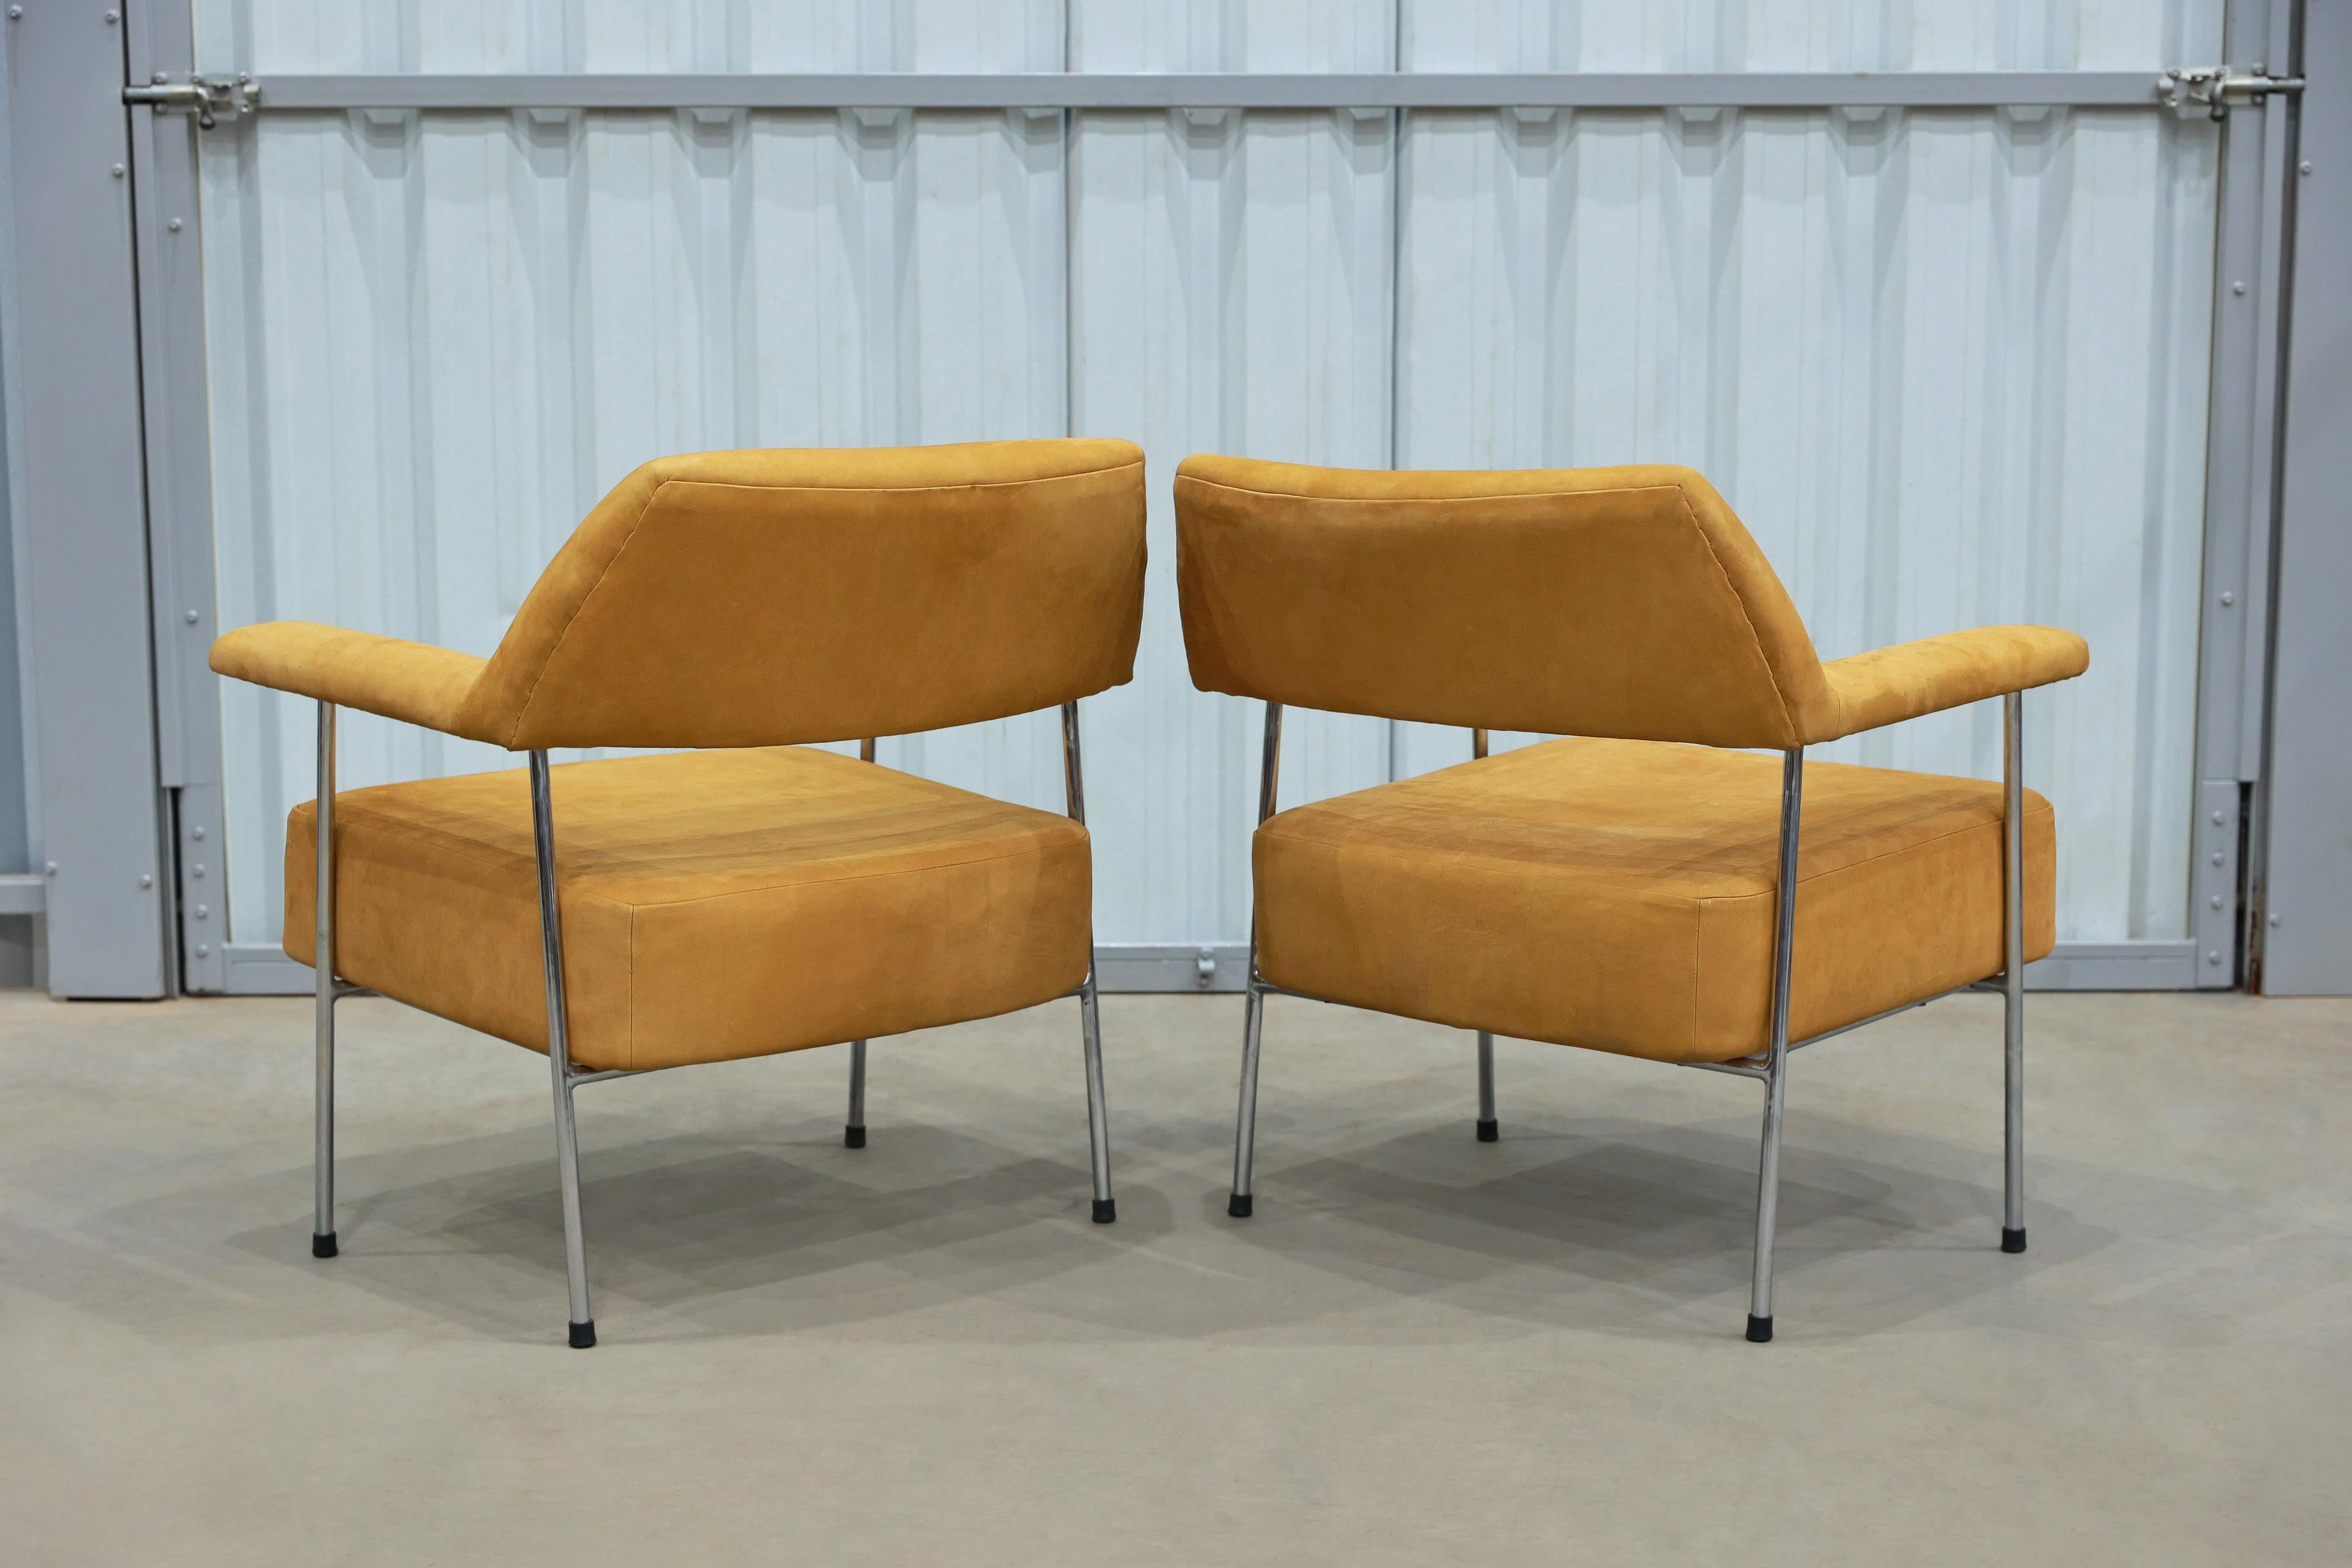 Welded Mid-Century Modern Armchair Set in Metal and Suede by Joaquim Tenreiro, Brazil For Sale